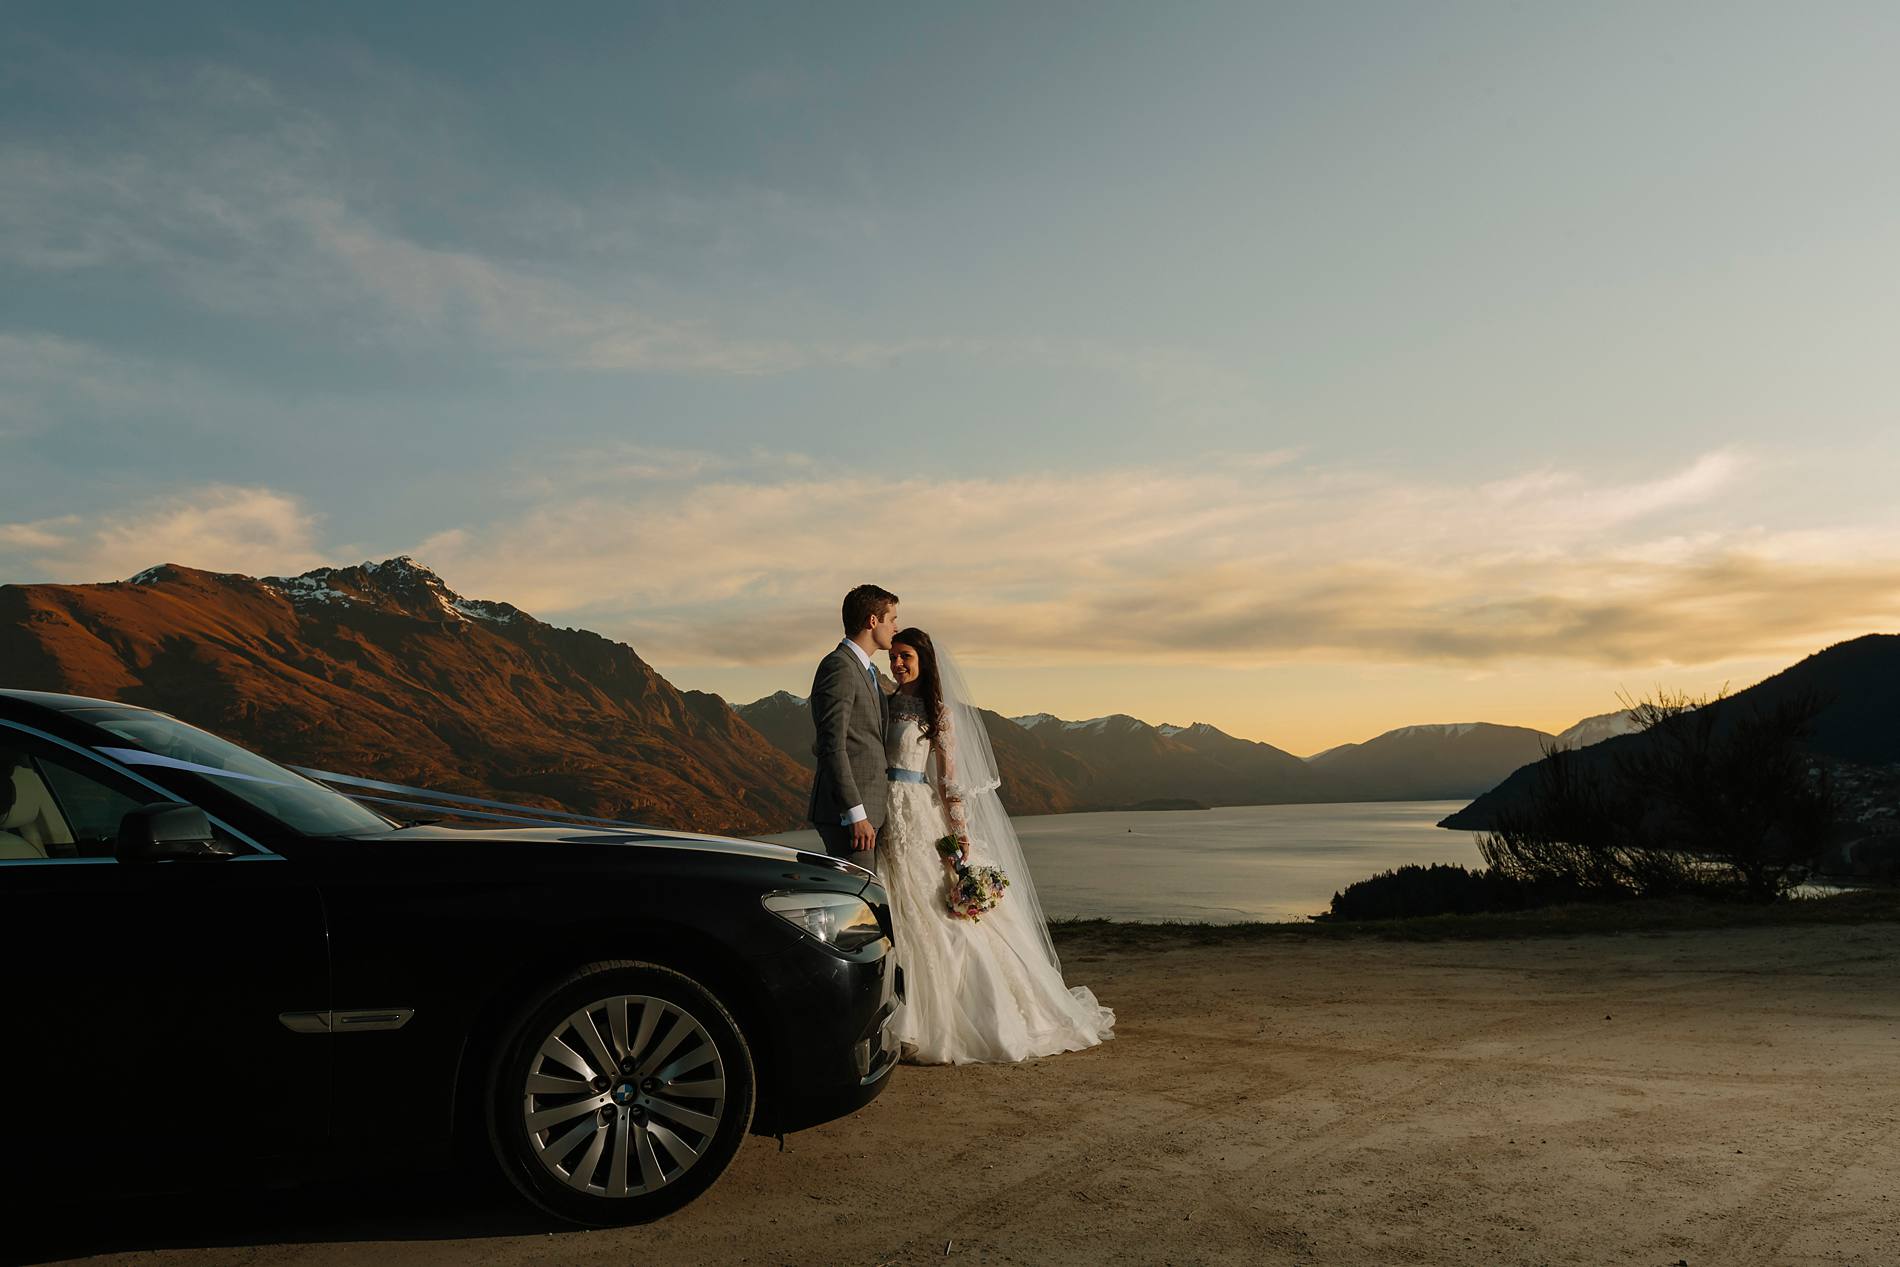 Bride and groom by car